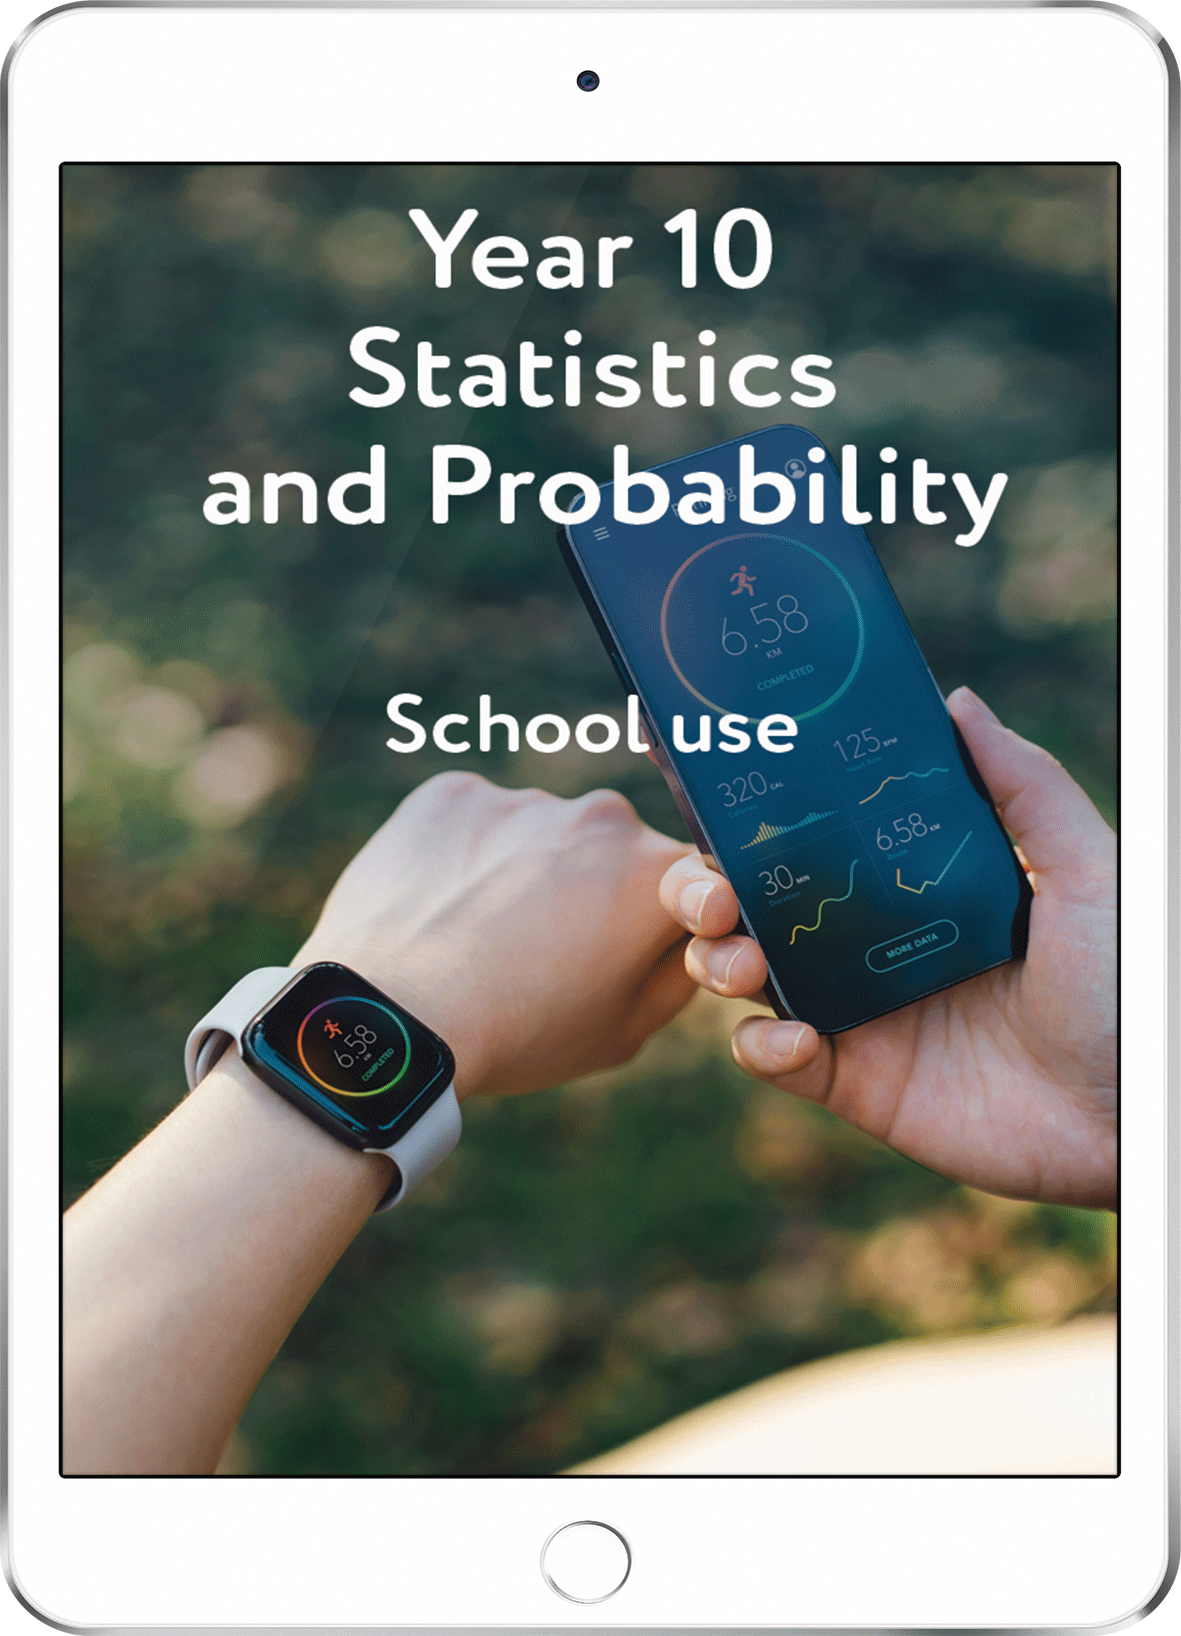 Year 10 Statistics and Probability - School Use